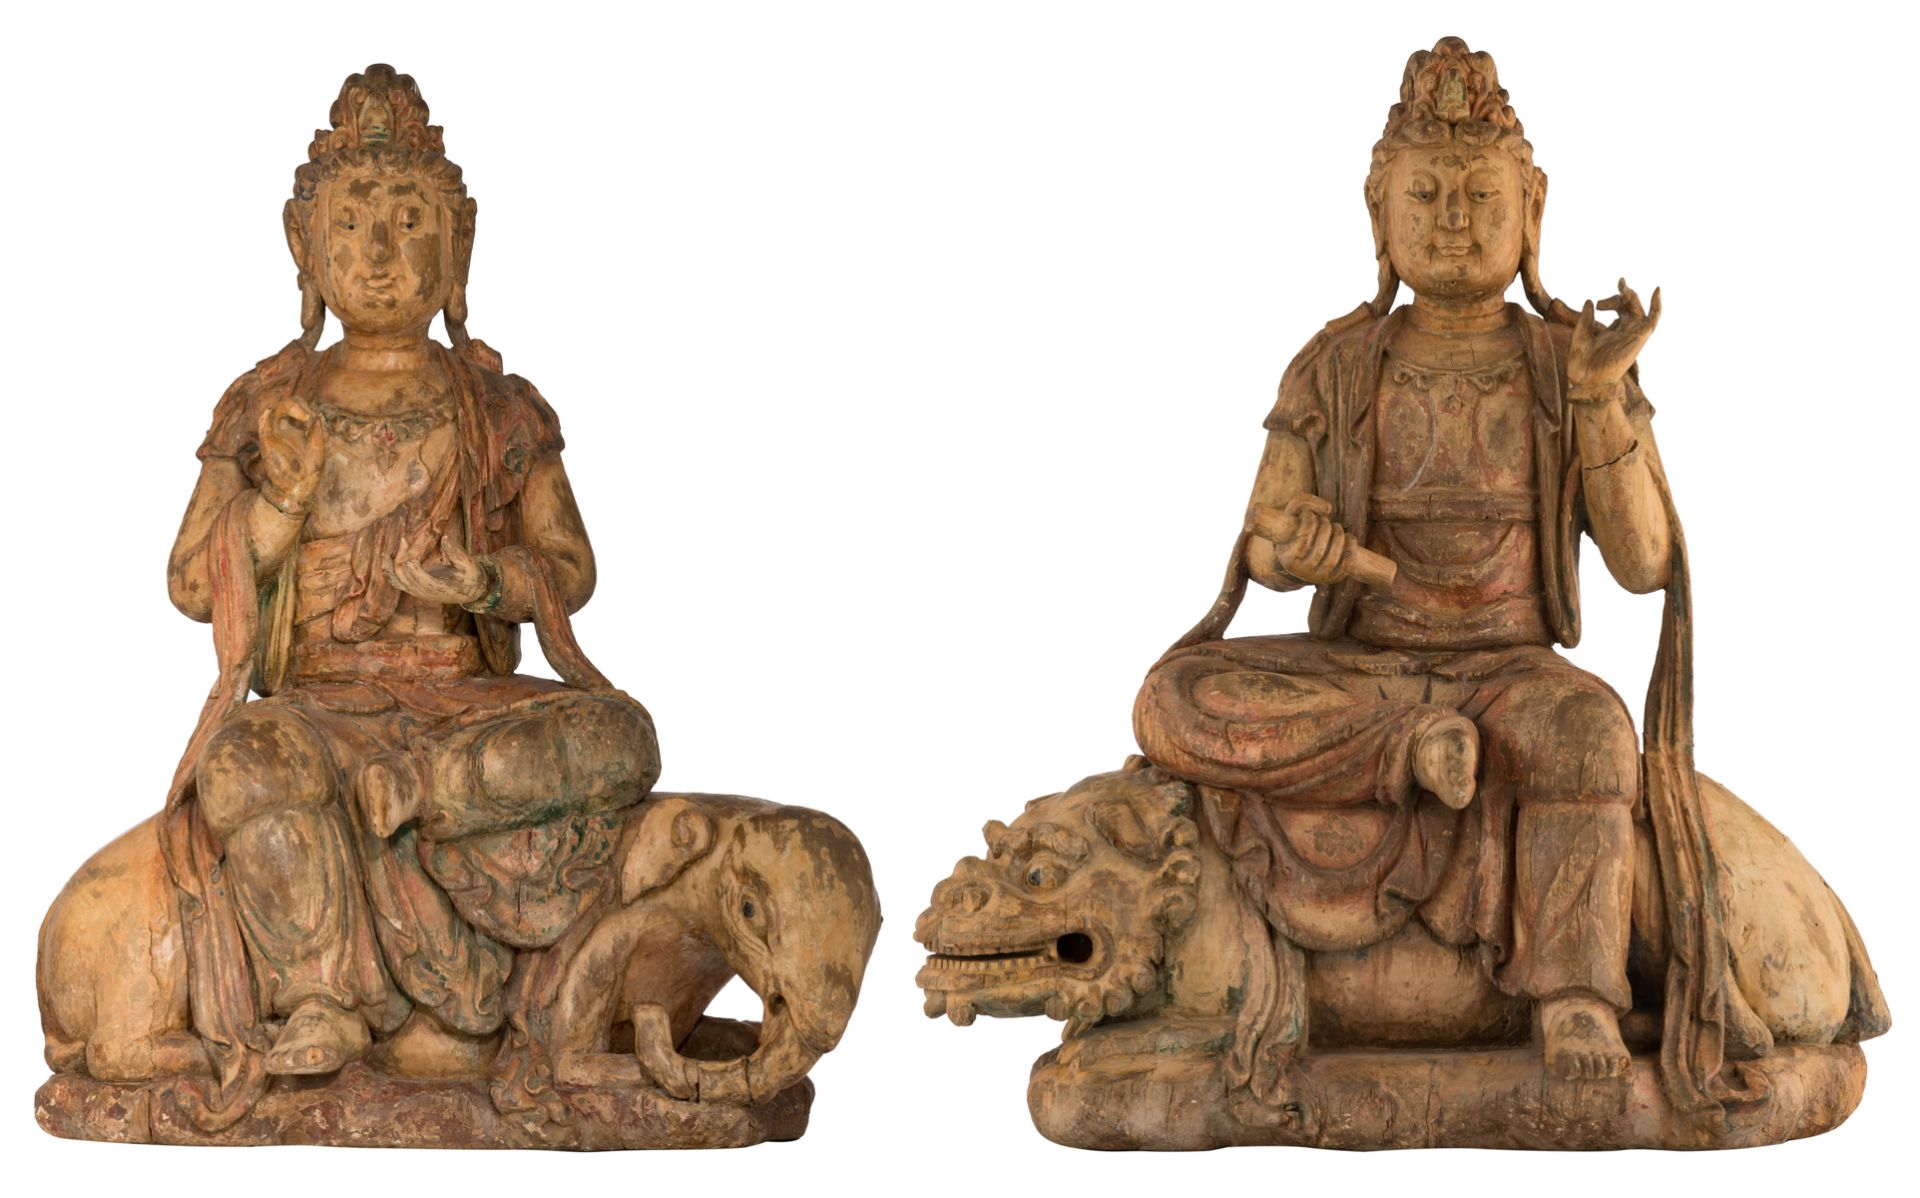 Two wooden sculptures representing Puxian Pusa on his mount and Wenshu Pusa on a lion, 16th - 17thC,